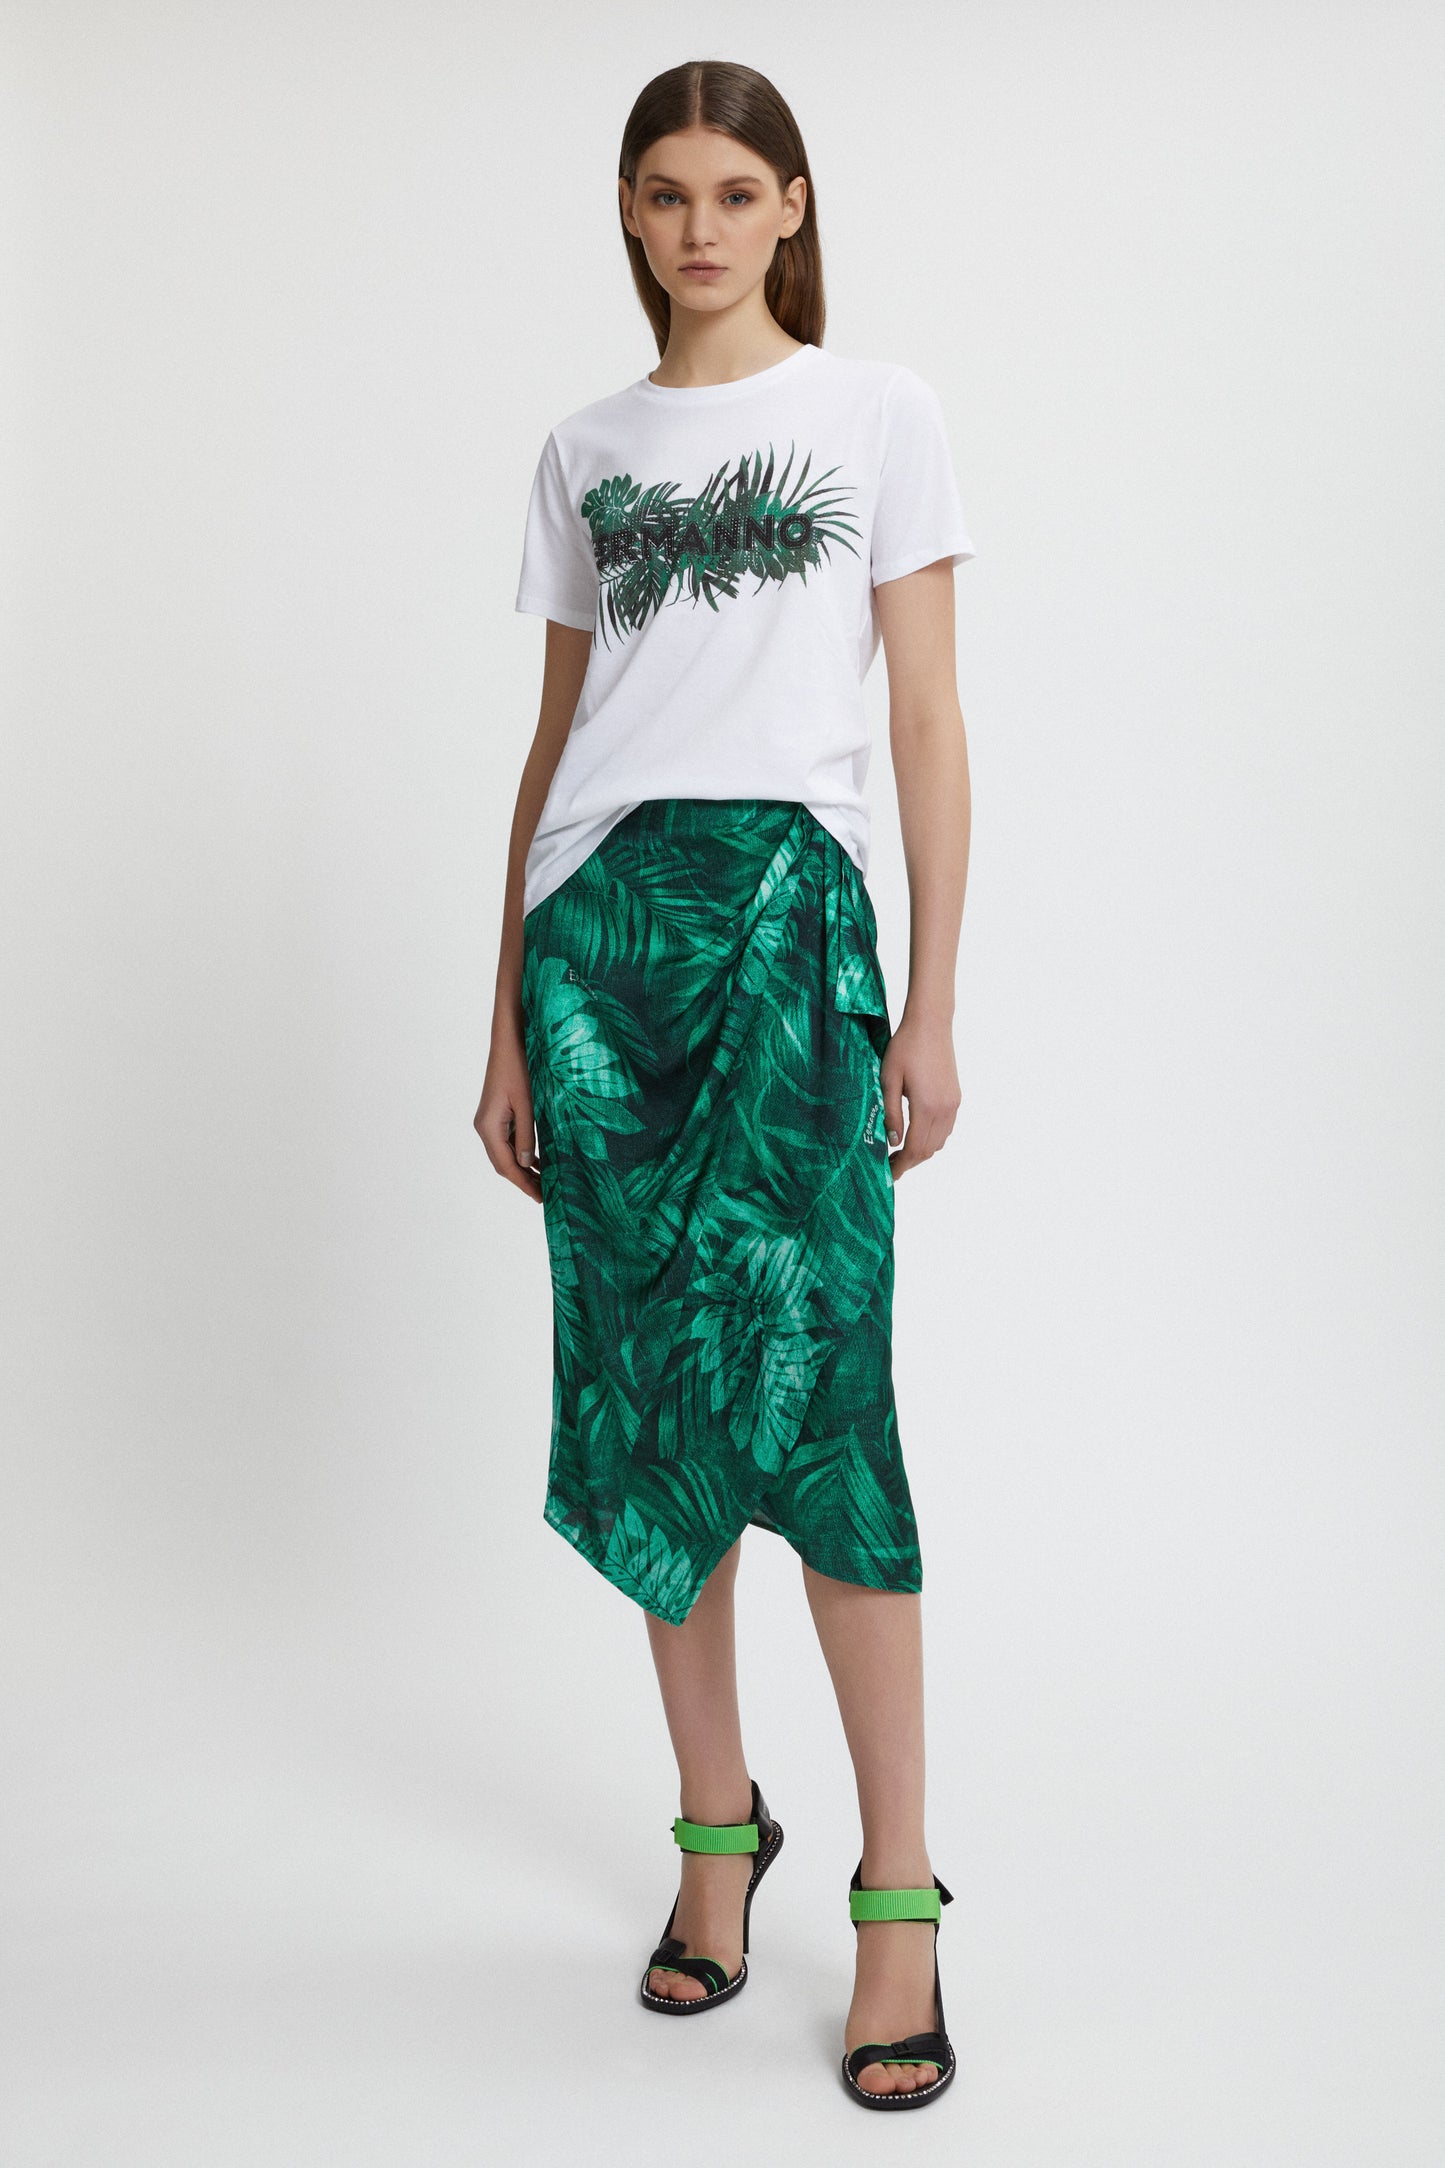 FOREST PRINTED T-SHIRT WITH RHINESTONE